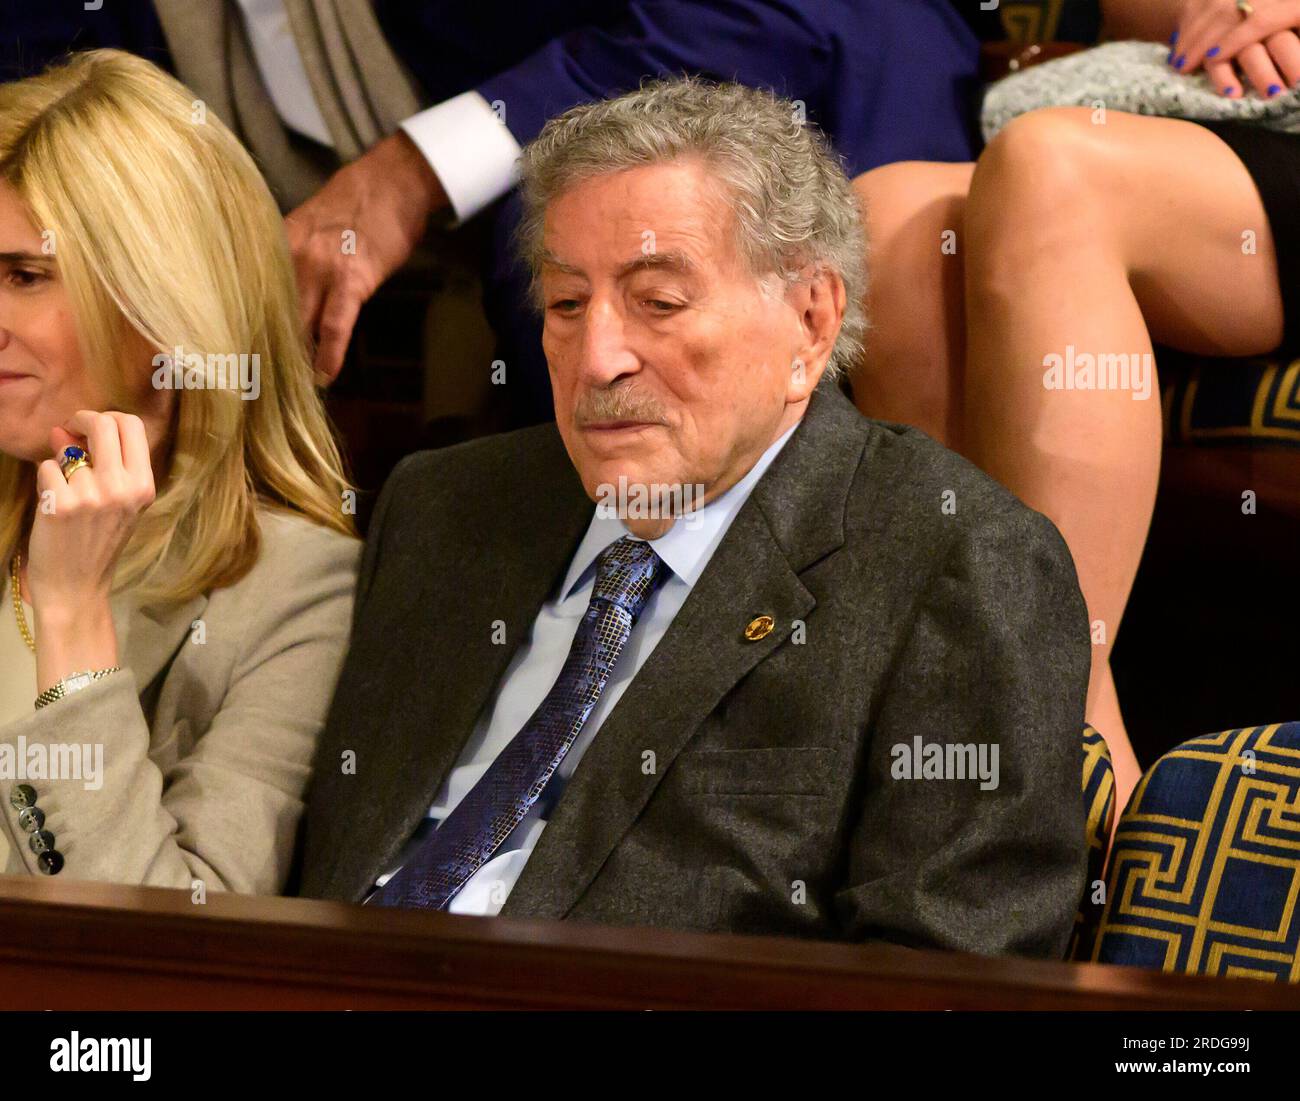 Singer Tony Bennett, a guest of Speaker of the United States House of Representatives Nancy Pelosi (Democrat of California), sits in the gallery as the 116th Congress convenes for its opening session in the US House Chamber of the US Capitol in Washington, DC on Thursday, January 3, 2019. Credit: Ron Sachs / CNP (RESTRICTION: NO New York or New Jersey Newspapers or newspapers within a 75 mile radius of New York City) Stock Photo